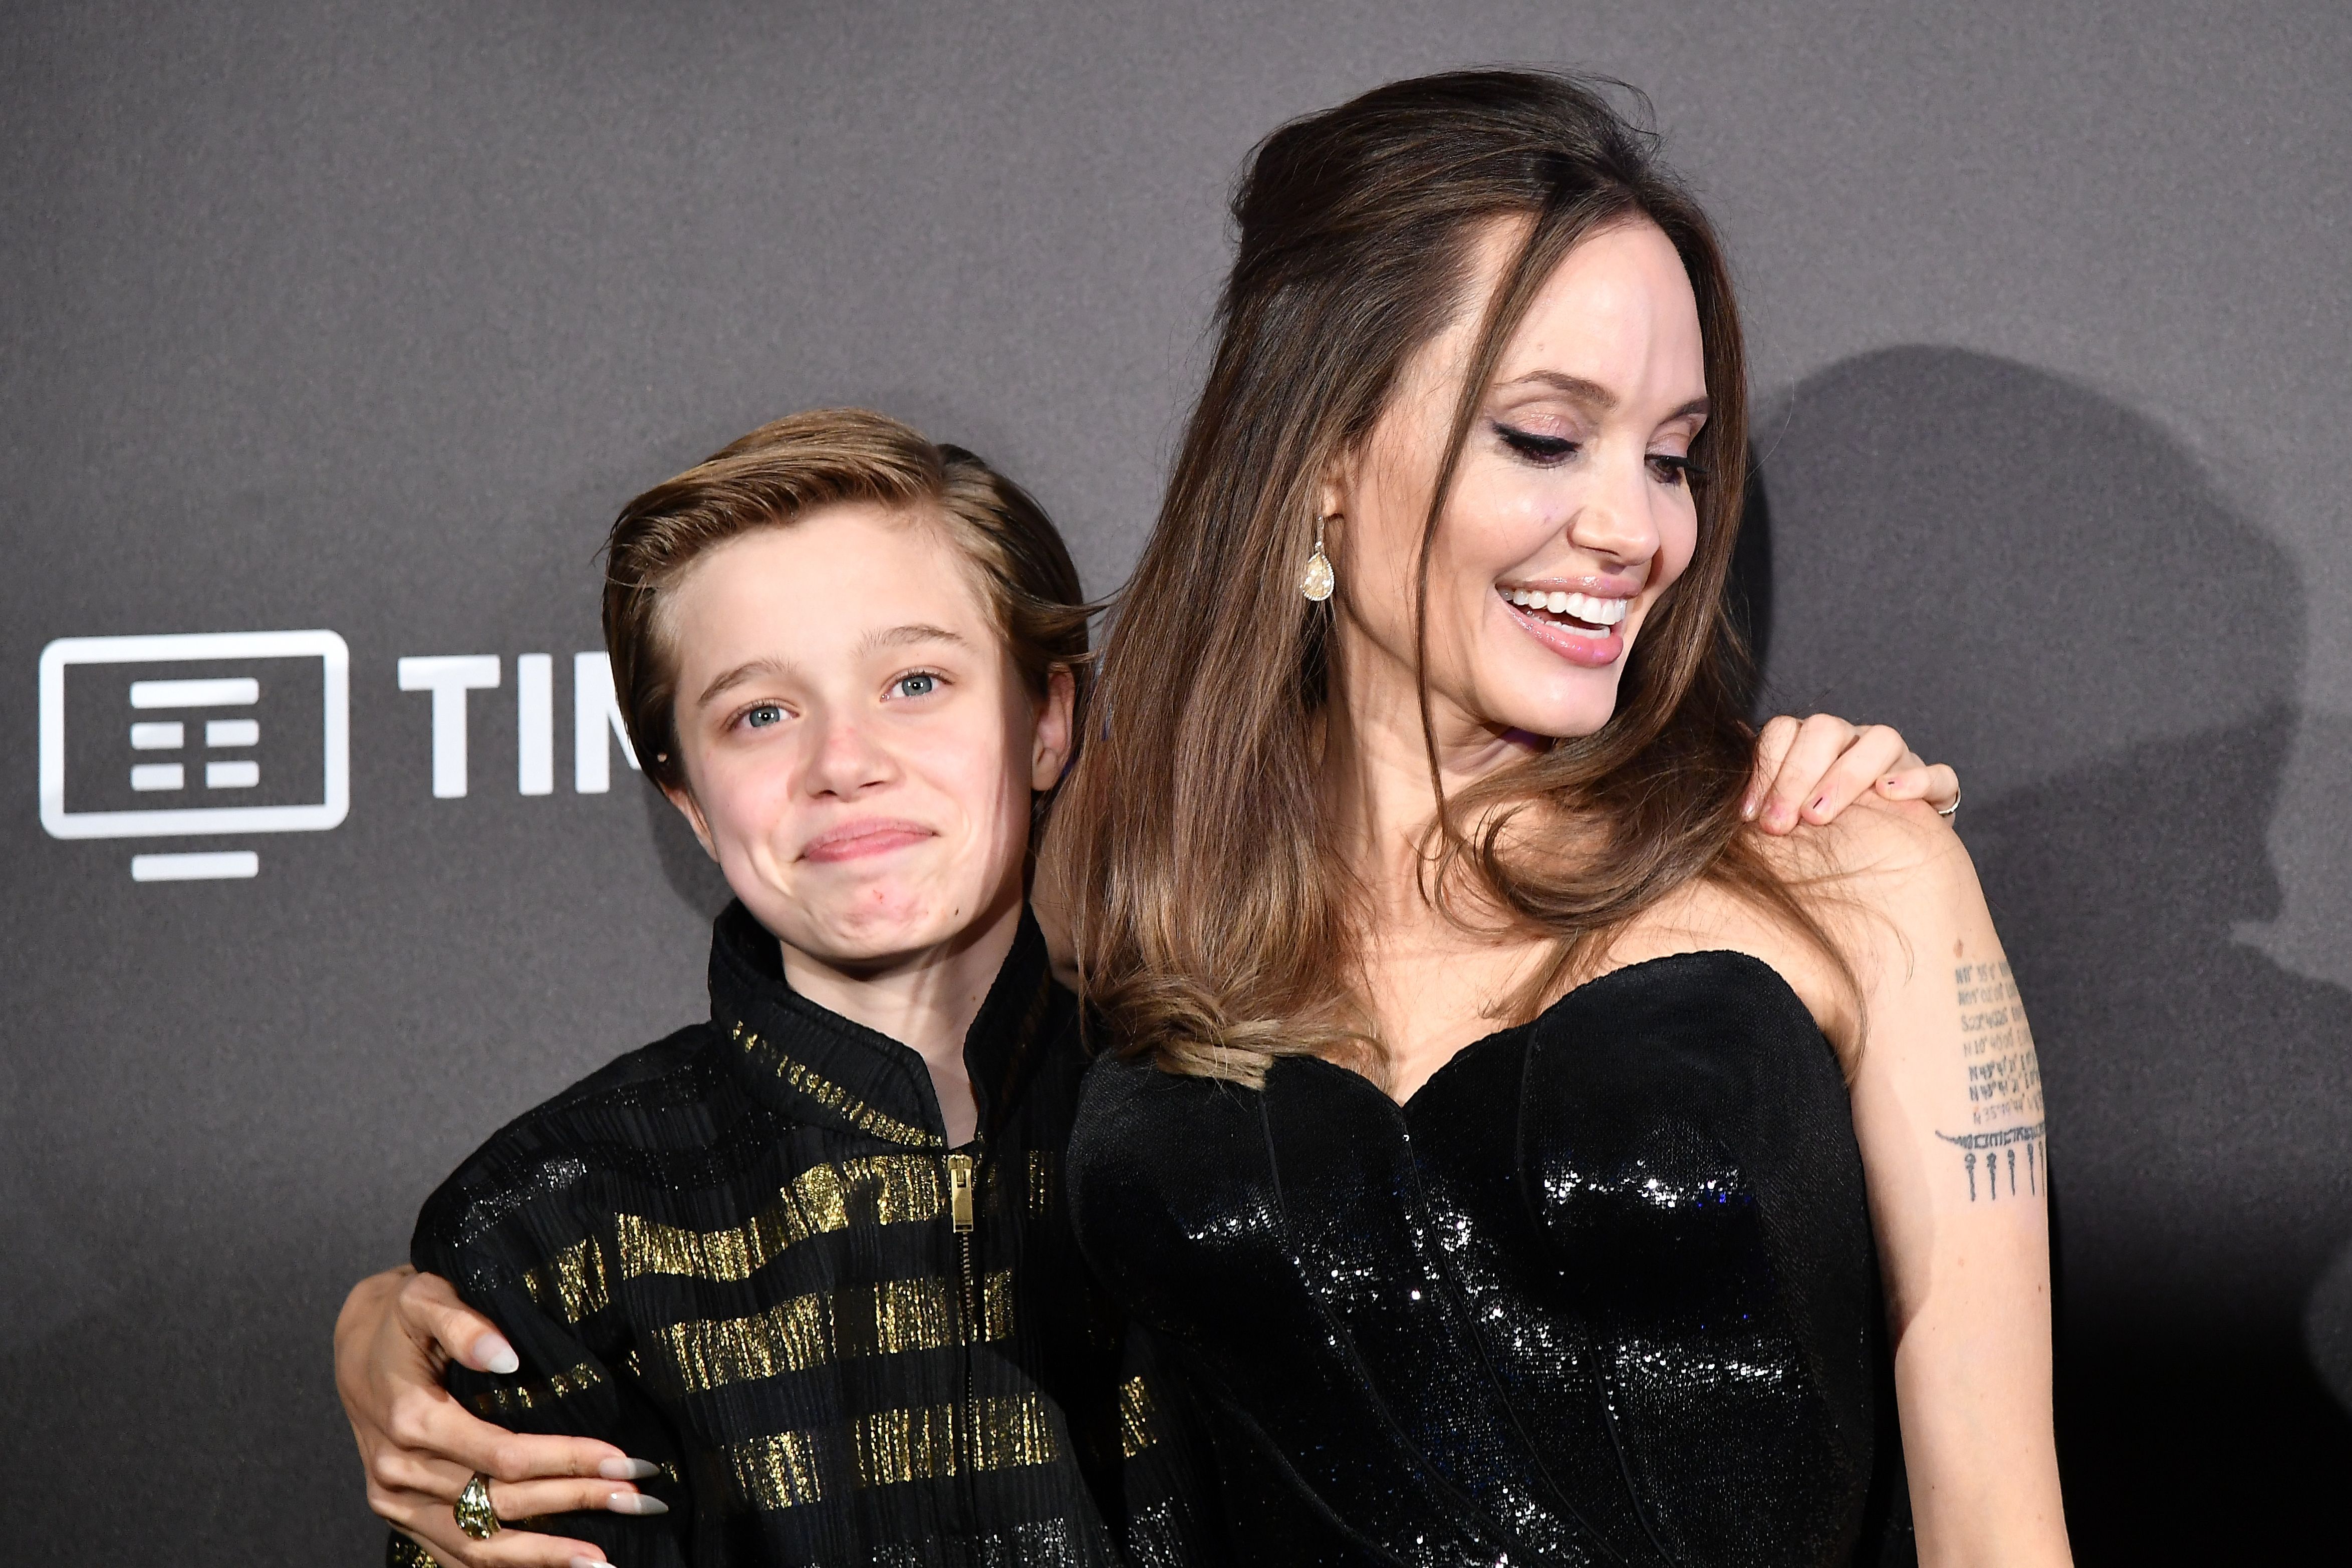 Angelina Jolie and Shiloh Nouvel Jolie-Pitt during the European premiere of Disney's dark fantasy adventure film "Maleficent : Mistress of Evil" on October 7, 2019, in Rome. | Source: Getty Images